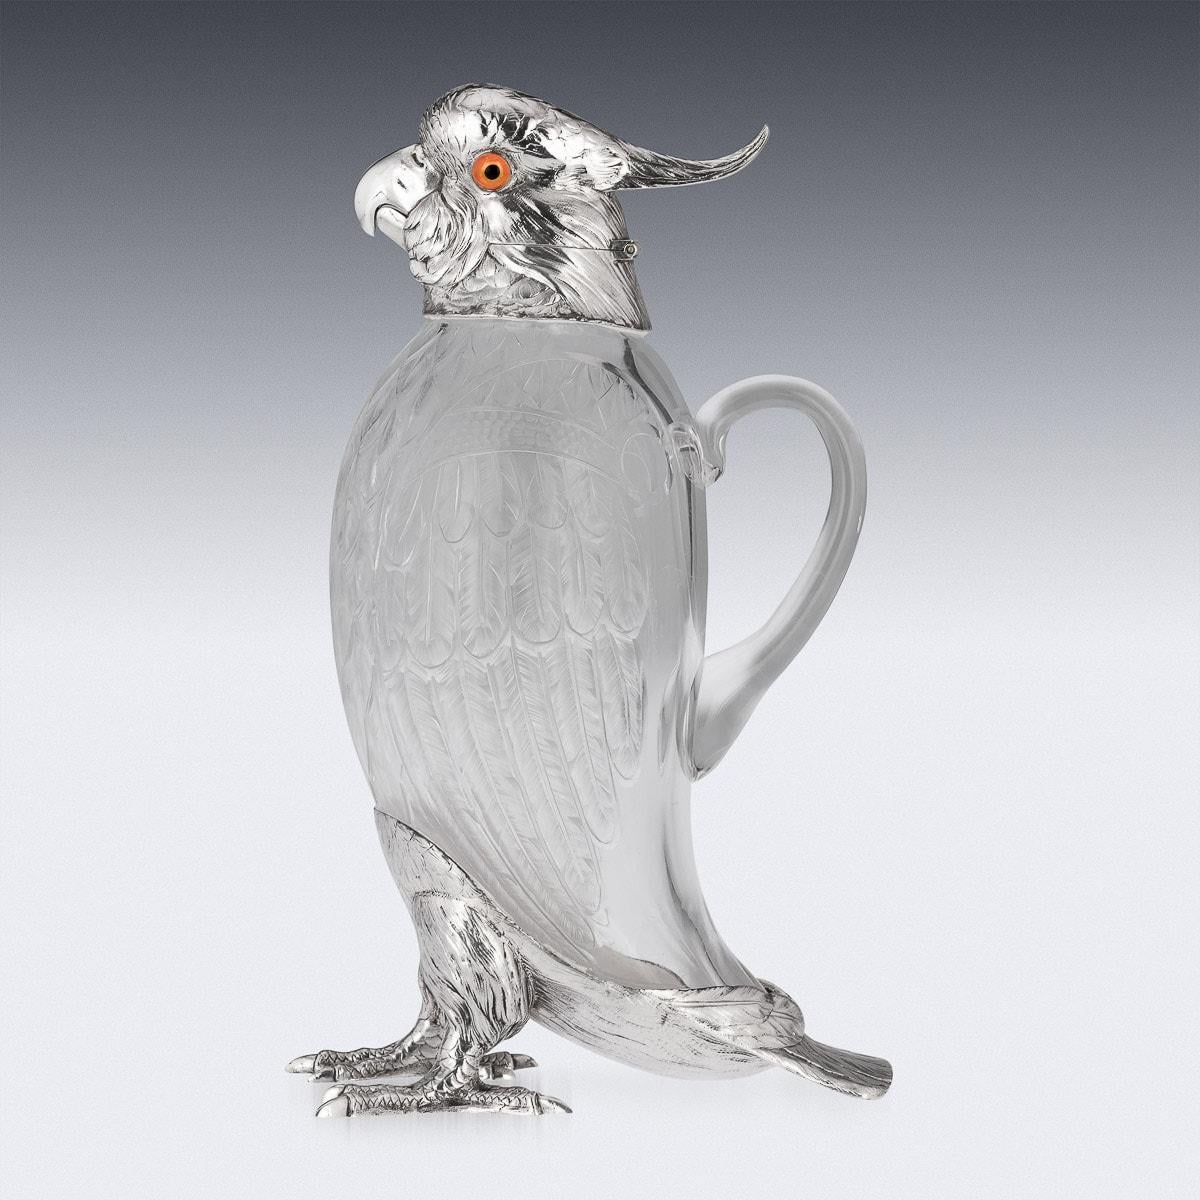 20th Century English silver and cut glass mounted novelty wine jug, in the form of a standing cockatoo, set with coloured glass eyes and translucent glass body imitating textured plumage, mounted with a realistically modelled silver head and